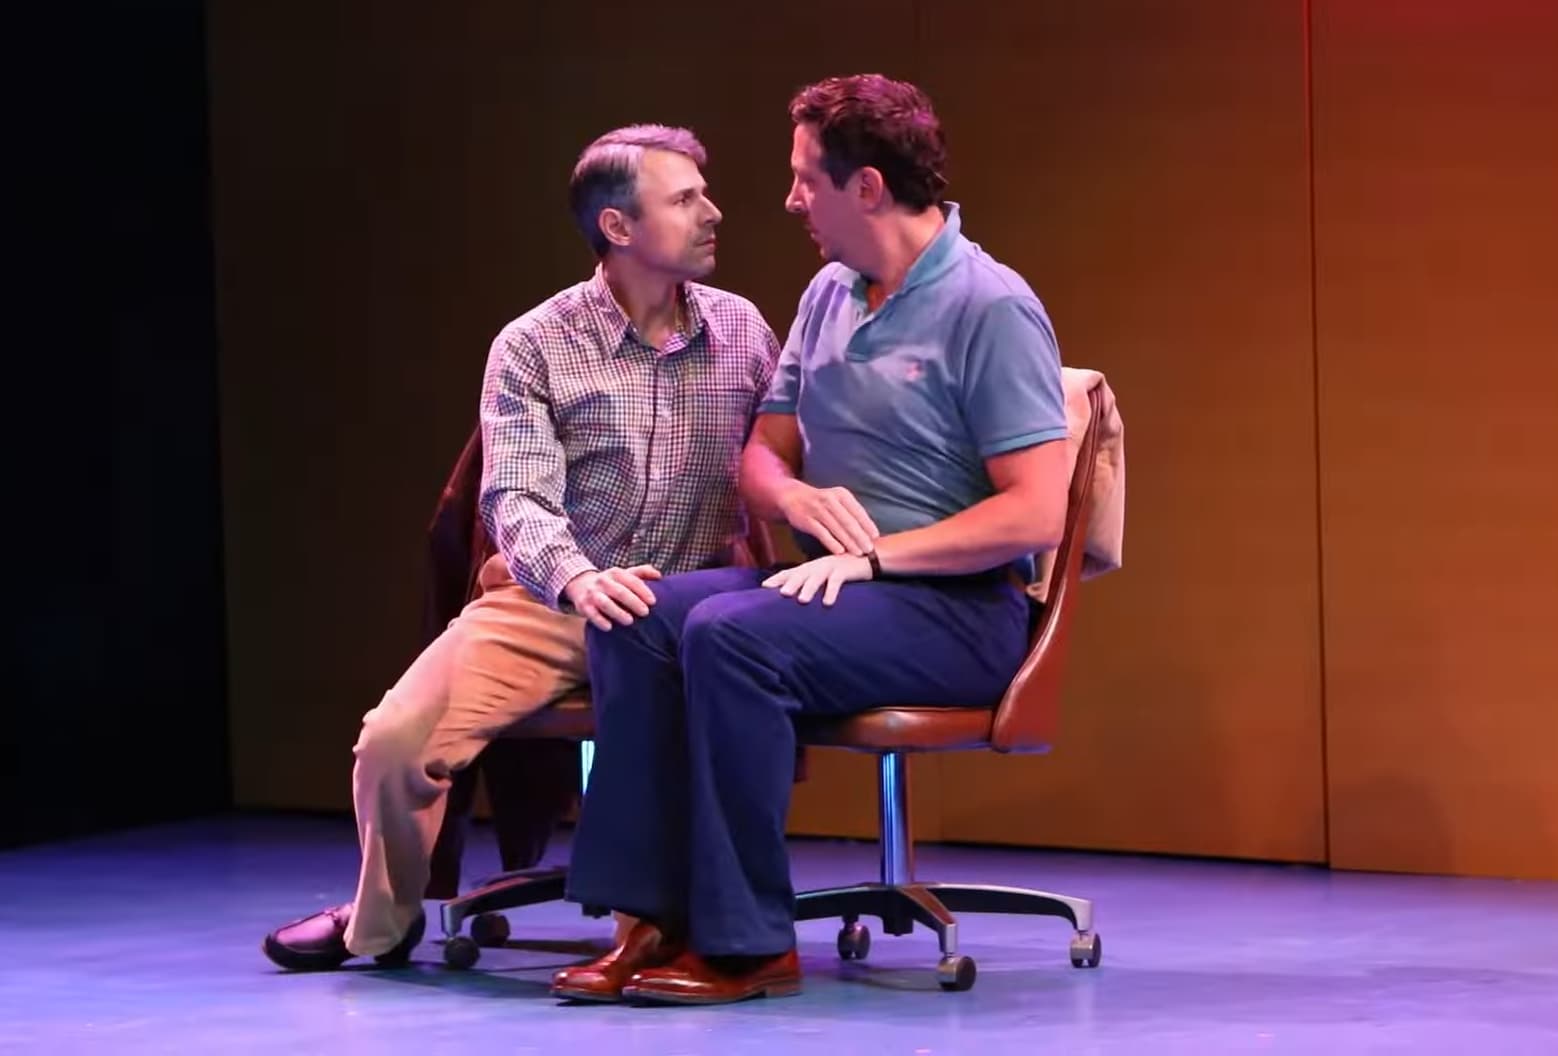 Two men sitting closely and looking at each other on a stage